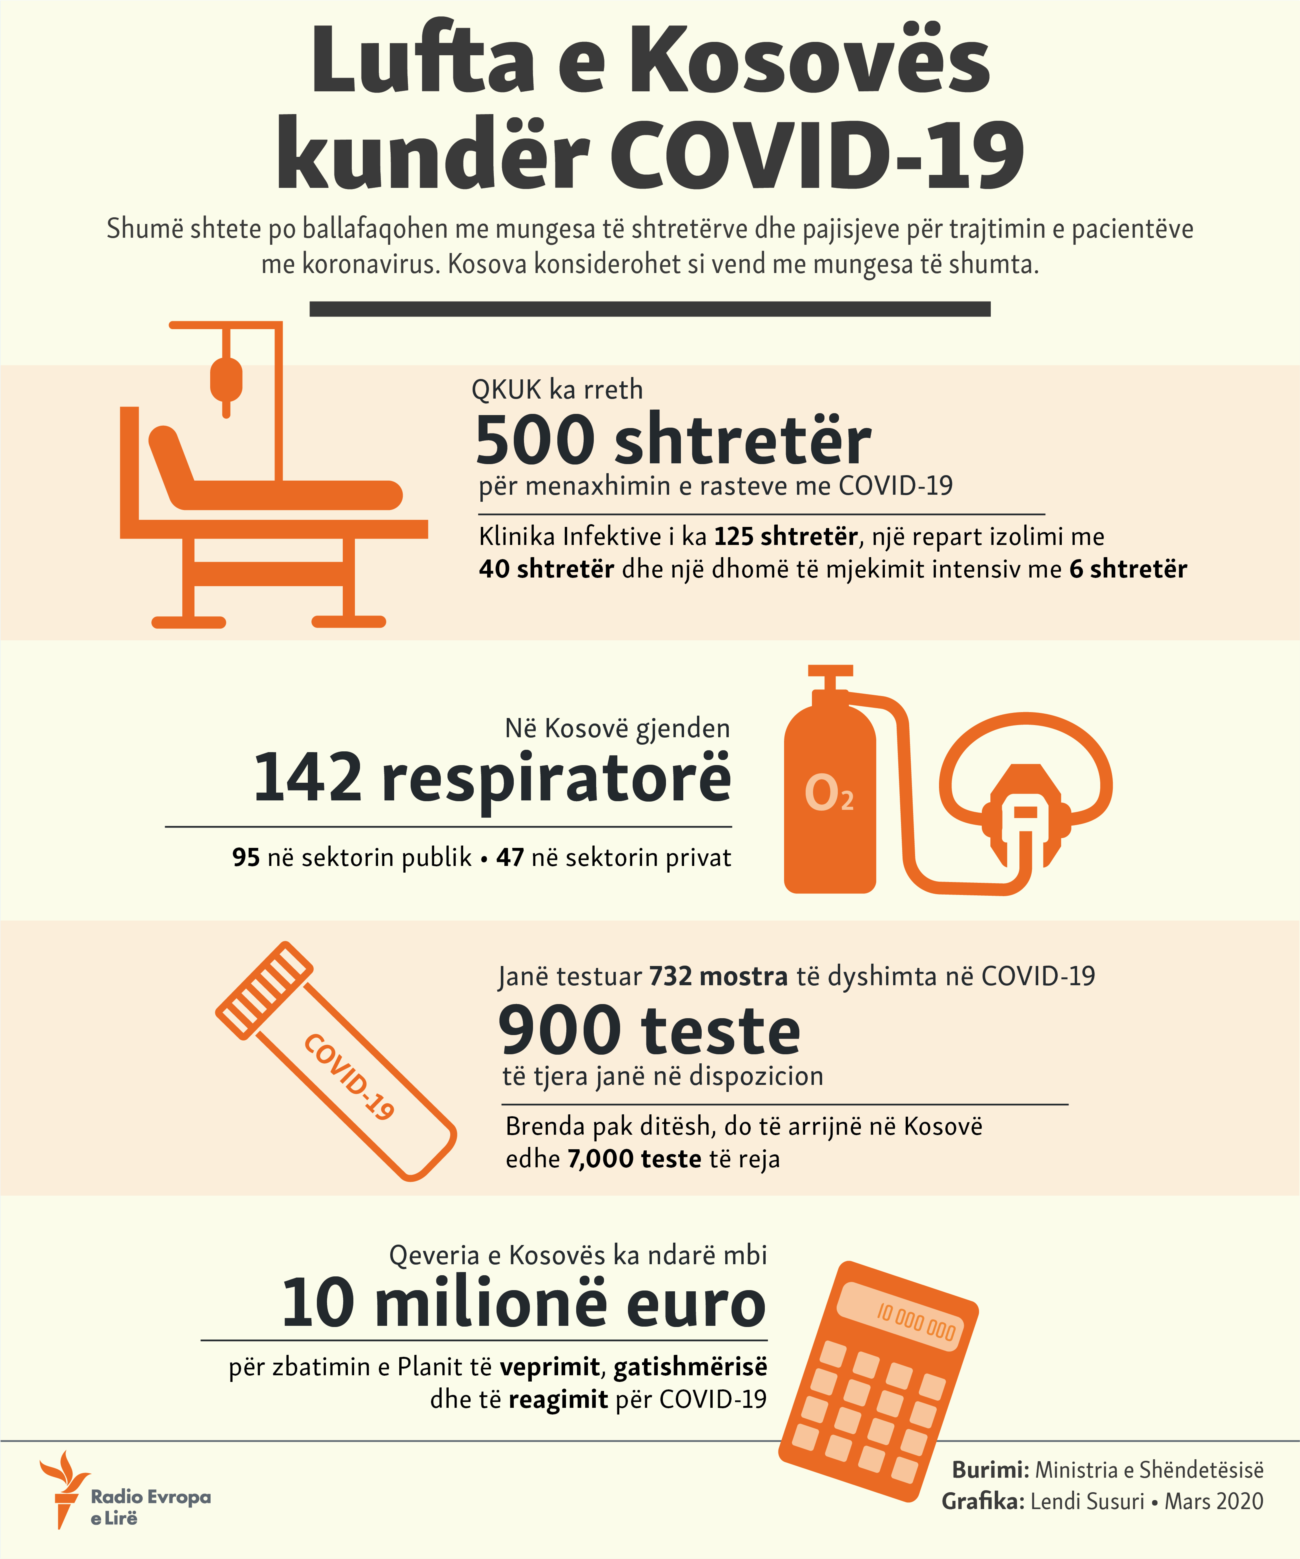 Kosovo: Info graphic - Capacities of Kosovo in the fight against COVID-19